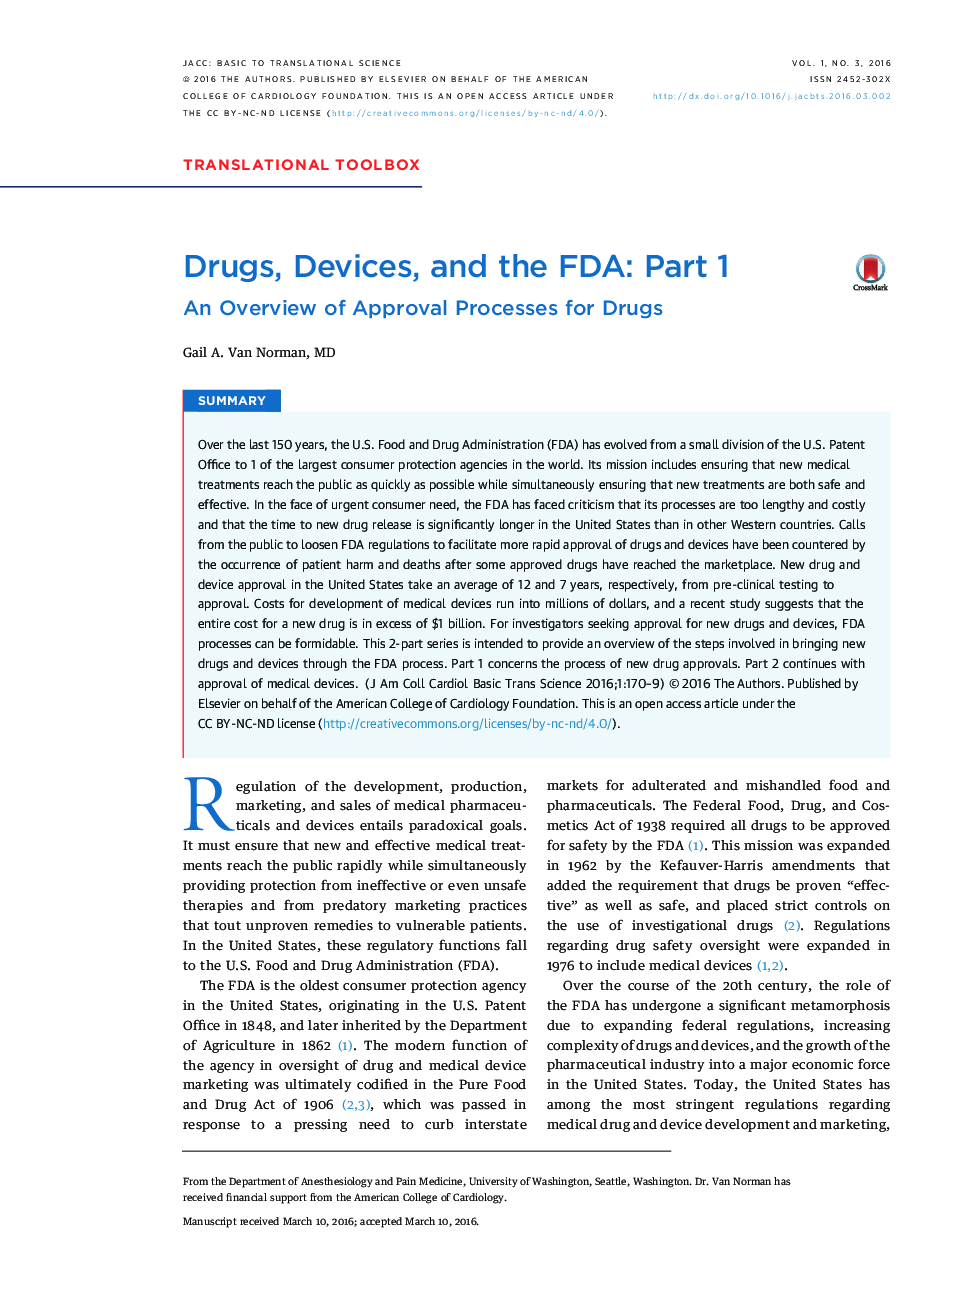 Drugs, Devices, and the FDA: Part 1 : An Overview of Approval Processes for Drugs